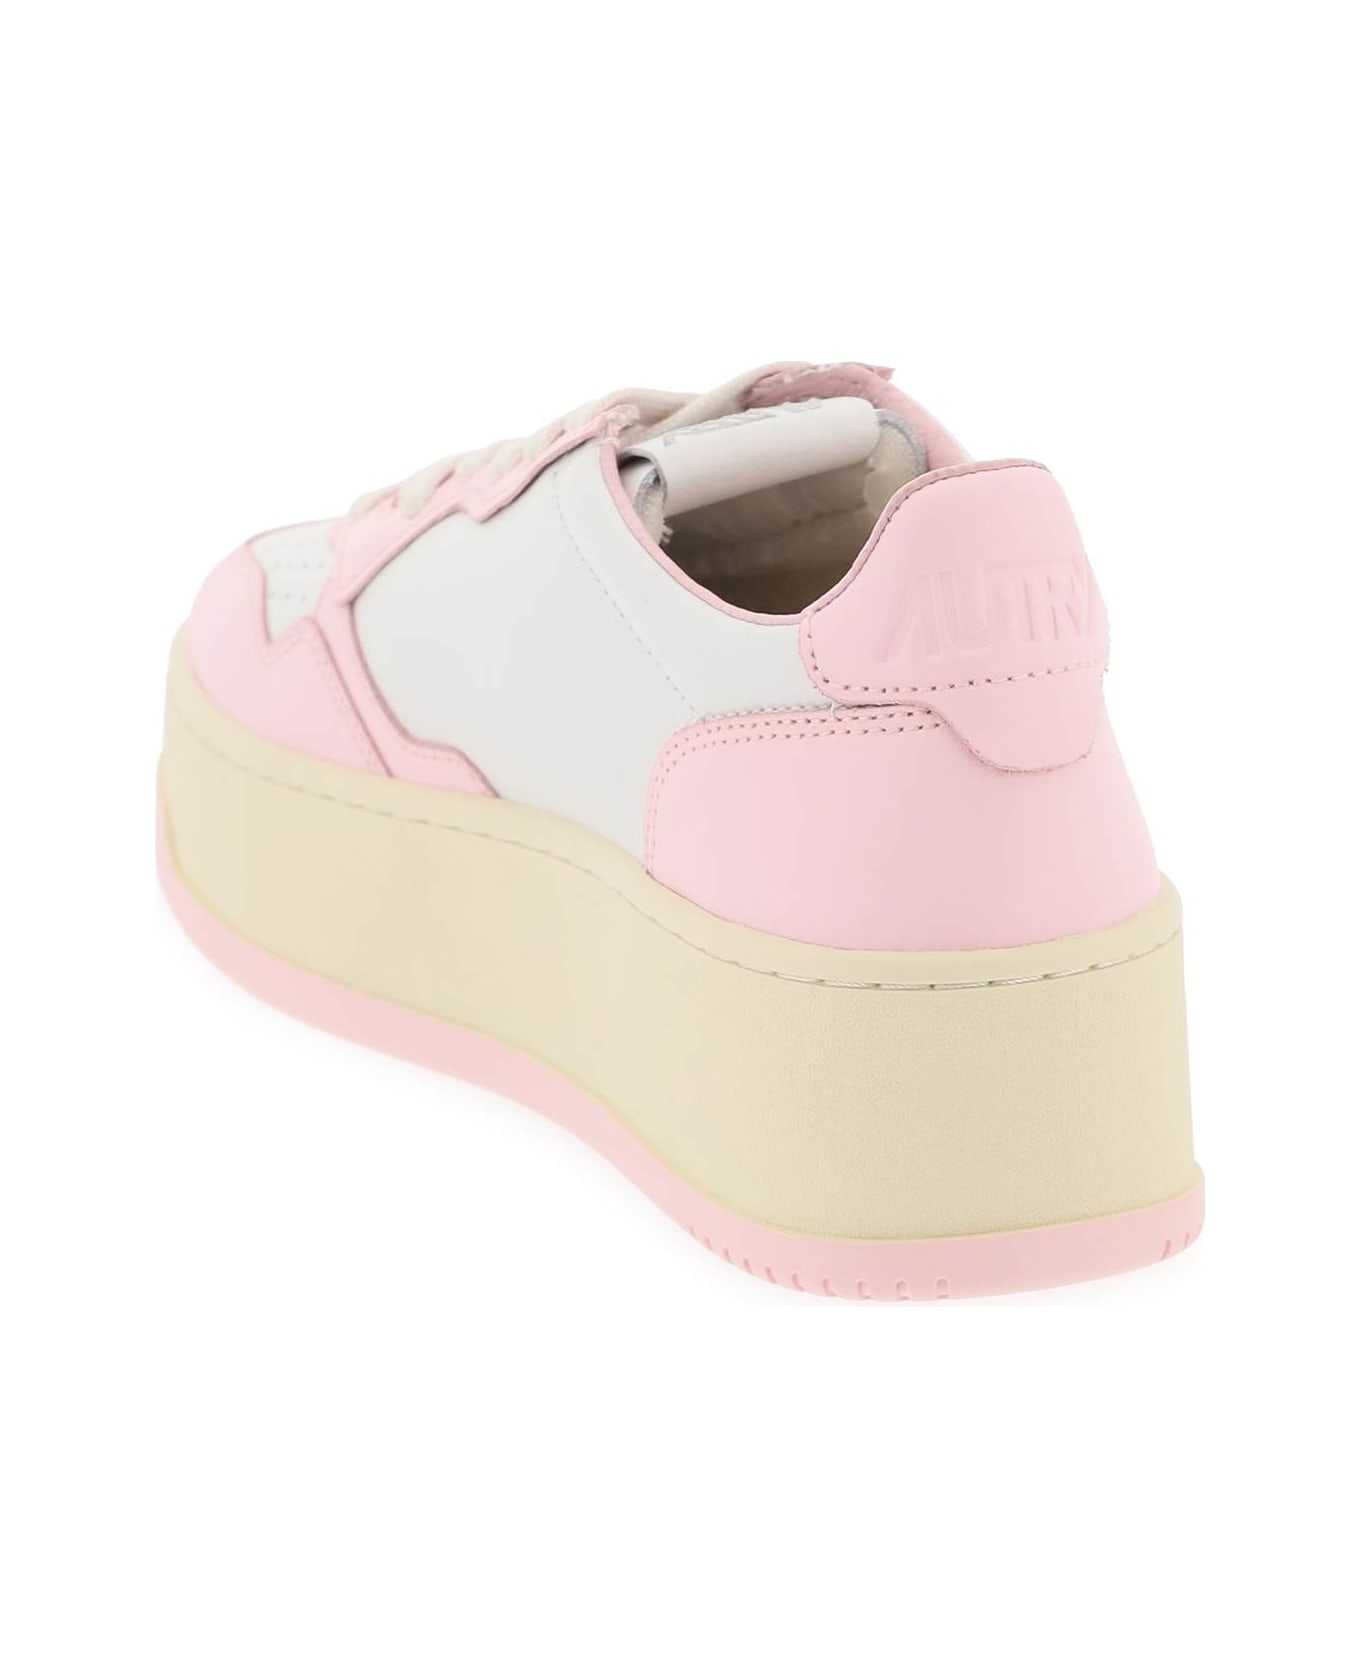 Autry Medalist Low Sneakers - BLUSH BRIDE (White) ウェッジシューズ